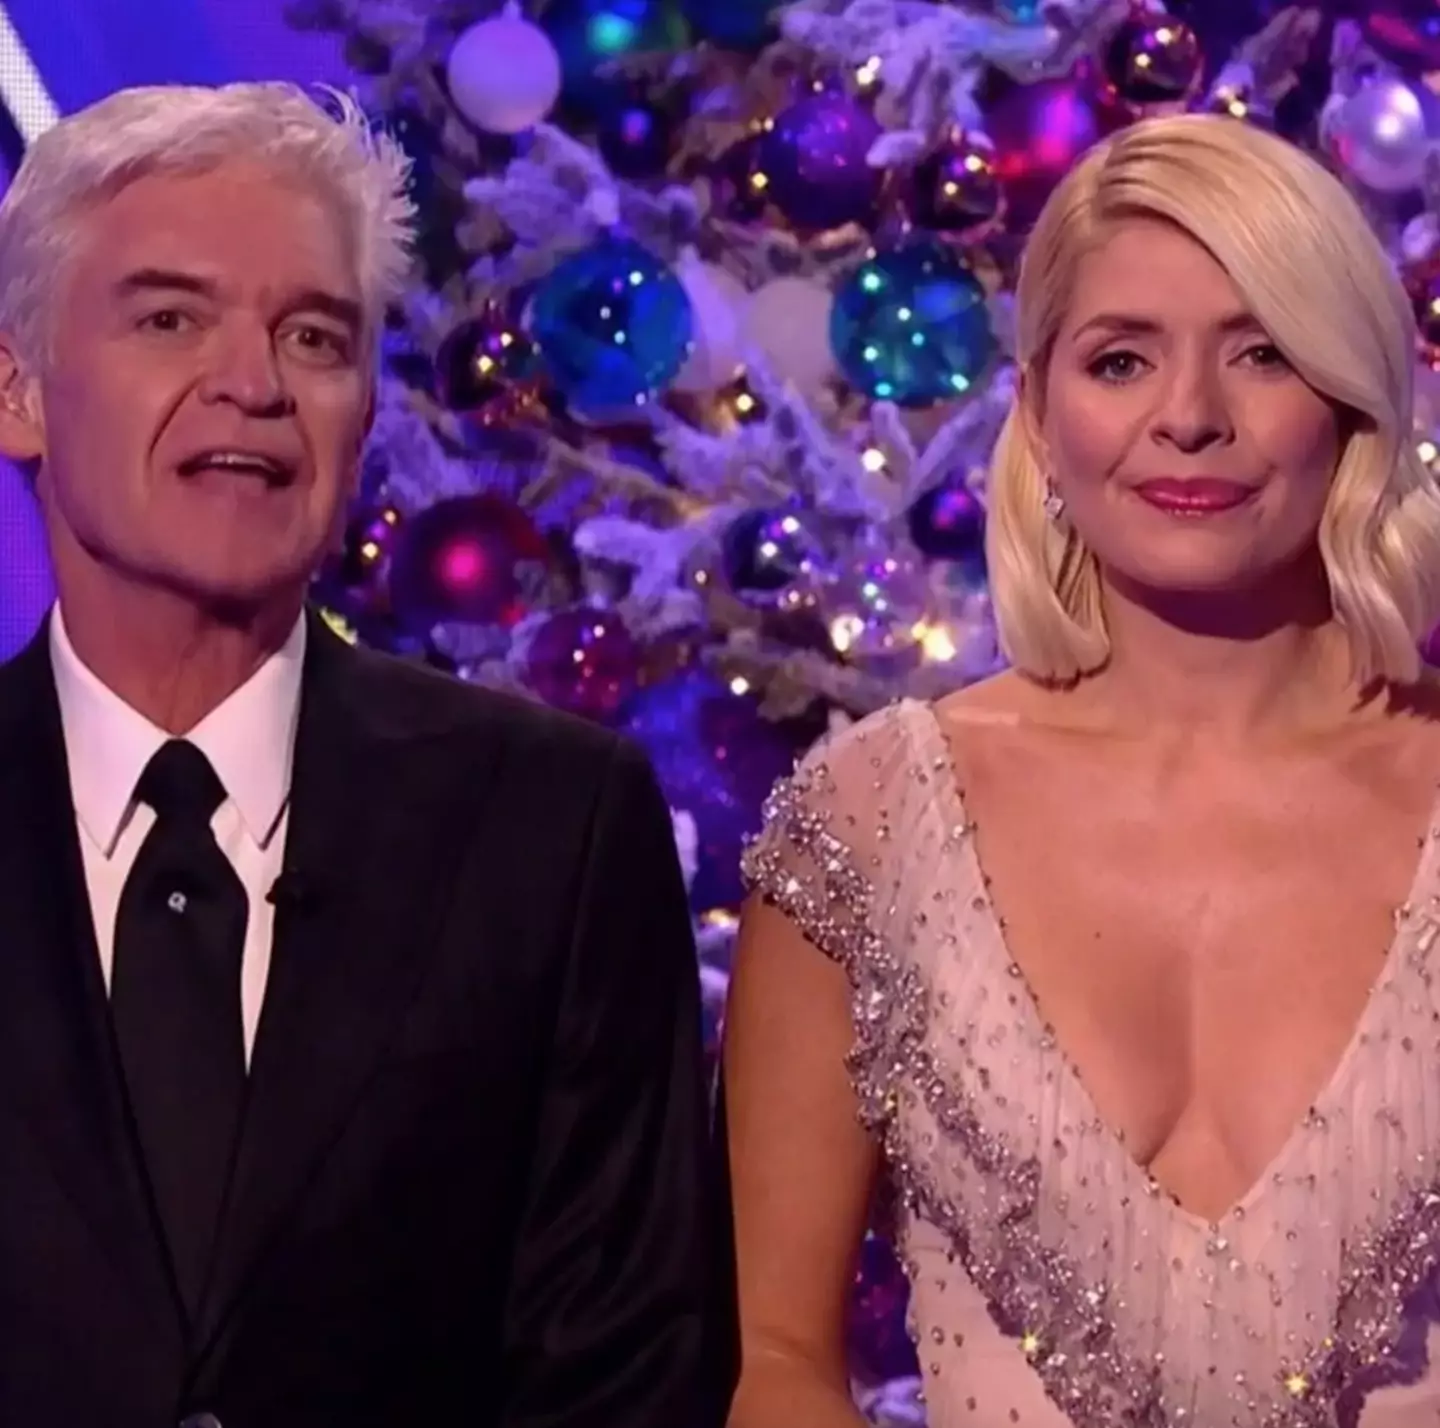 Holly will return to Dancing on Ice later this month.